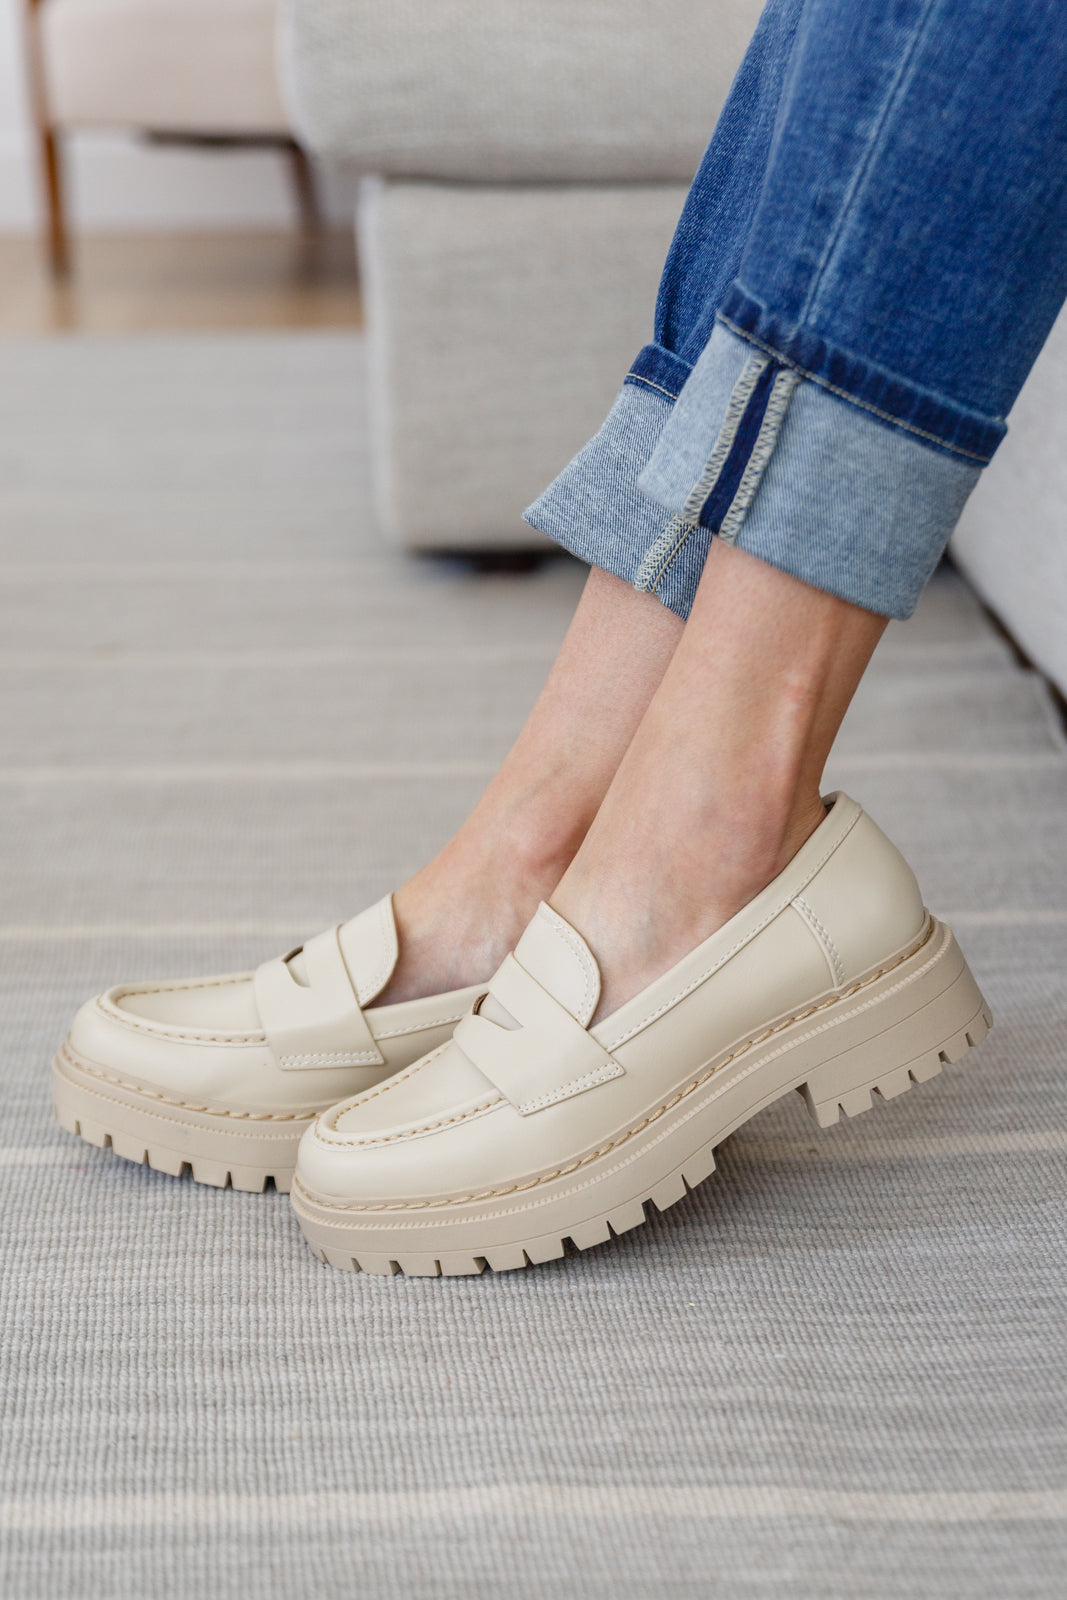 Penny For Your Thoughts Loafers in Bone (Online Exclusive)